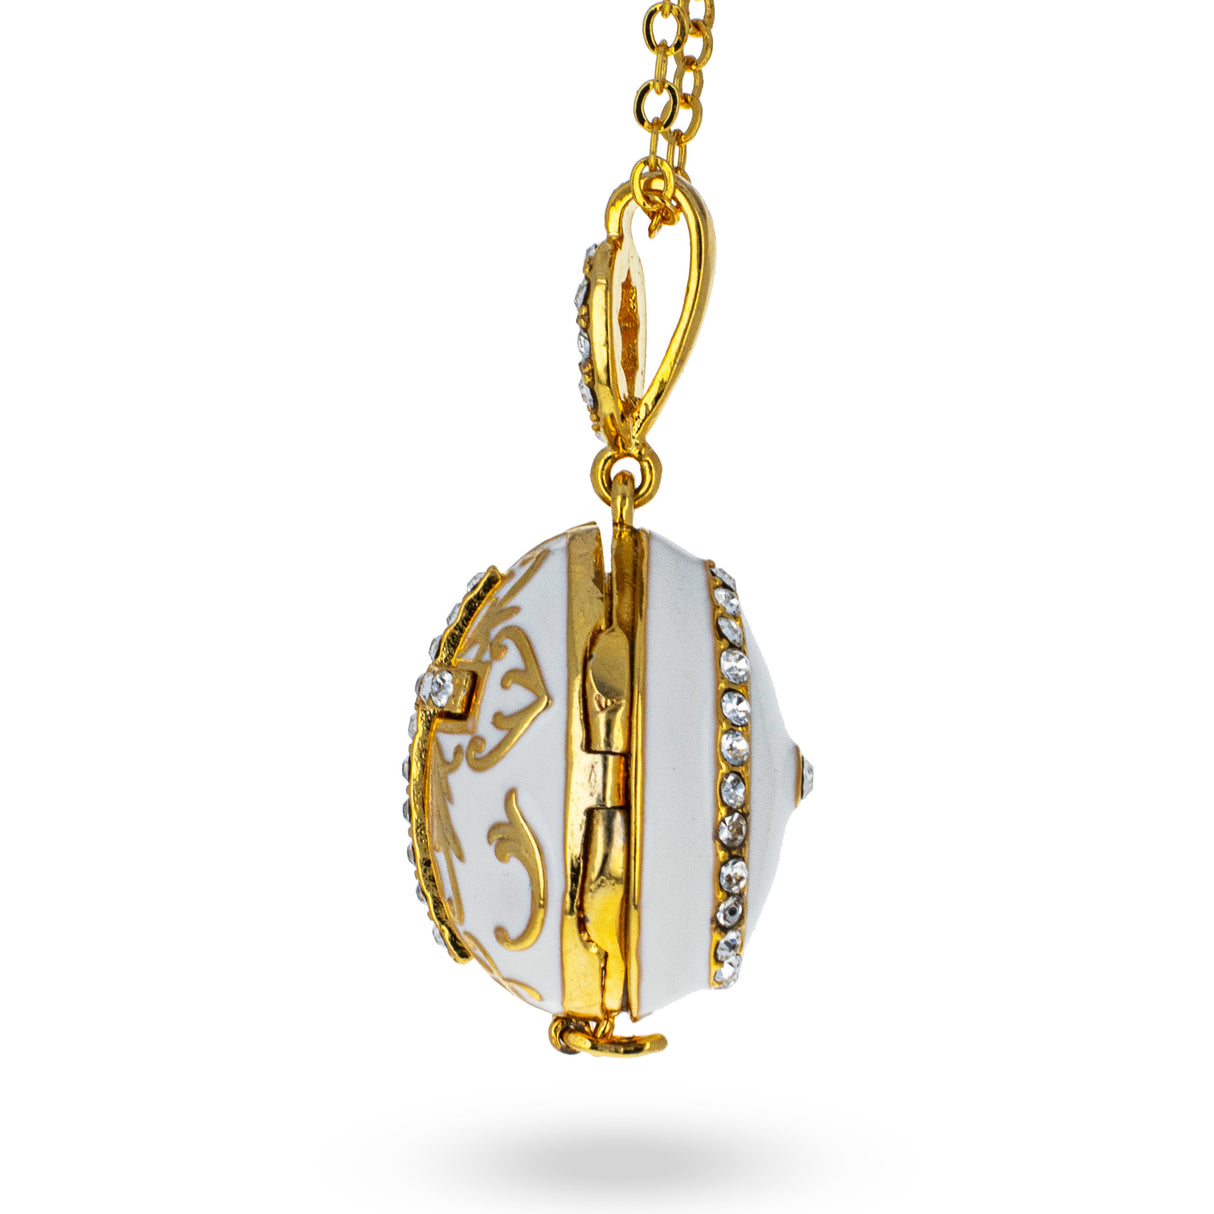 White Brass 50 Crystals Triptych Icons Royal Egg Pendant Necklace ,dimensions in inches: 1.02 x 20 x 0.7